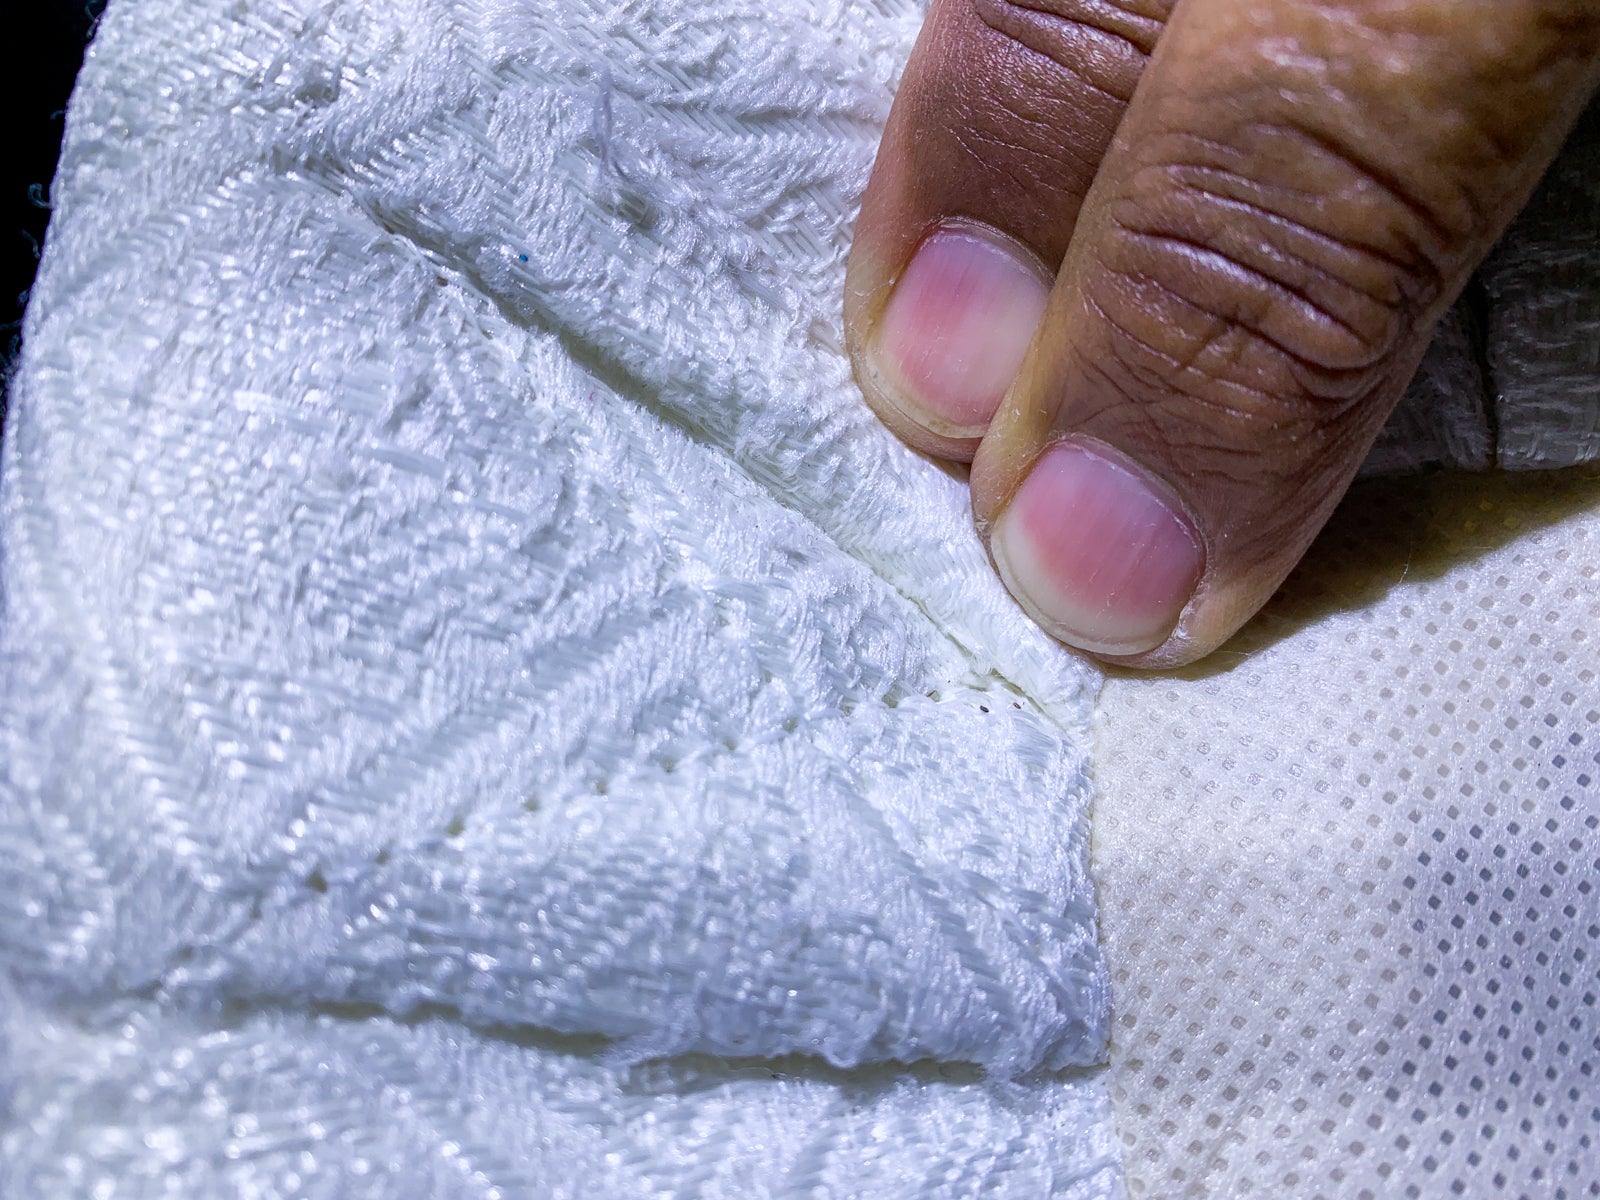 can bed bugs live on memory foam mattress